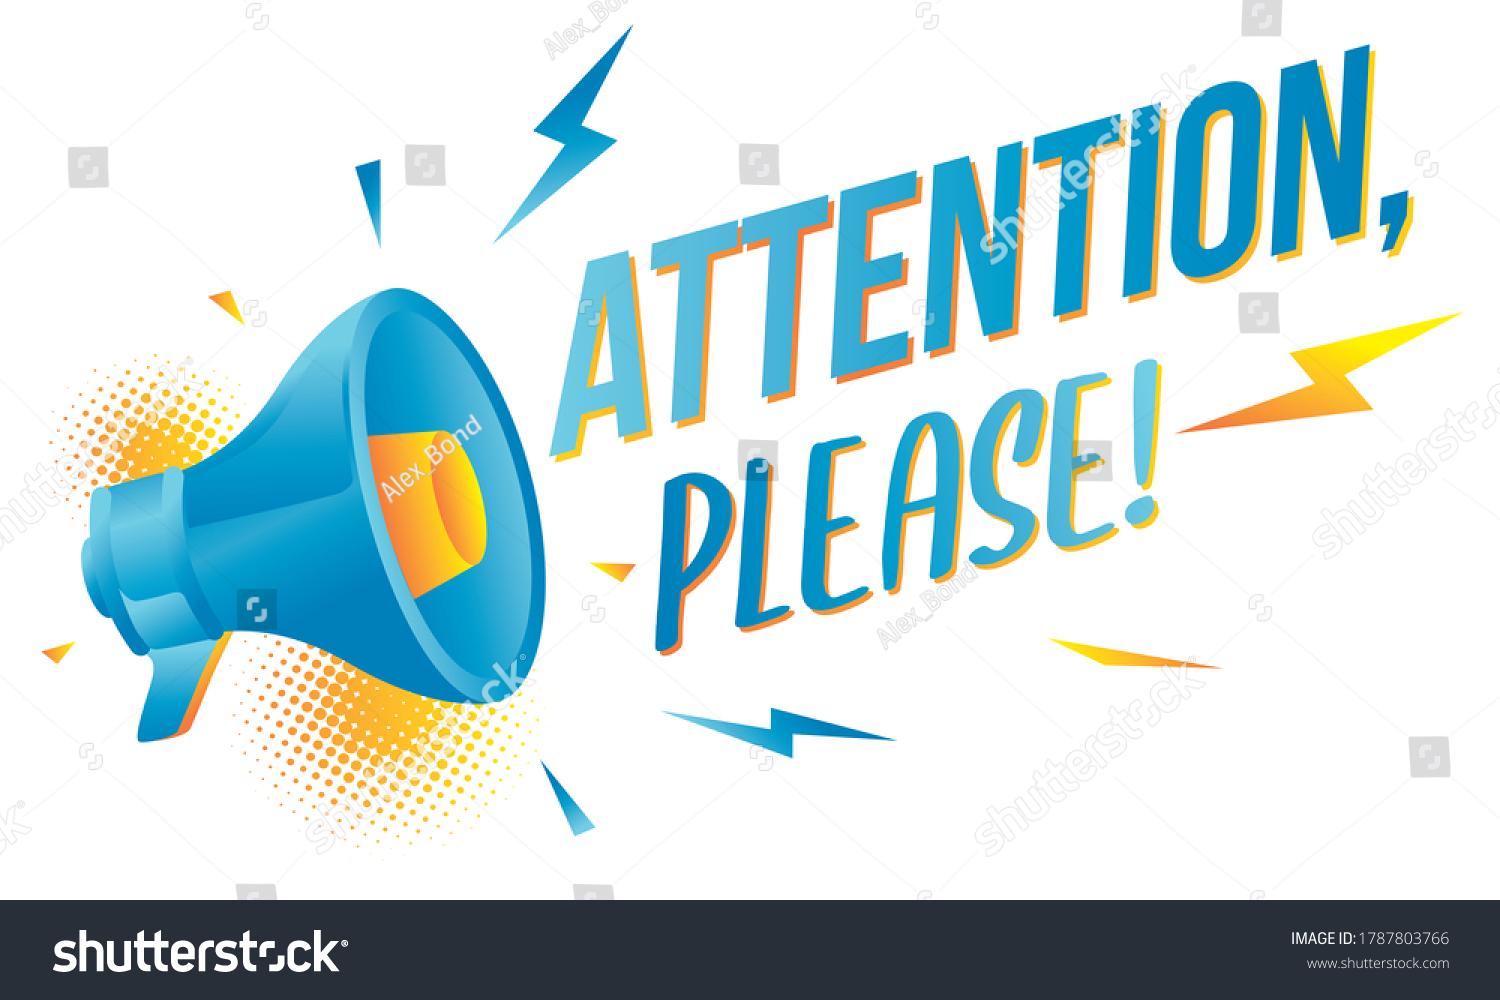 Attention Please Advertising Sign Megaphone Stock Vector Royalty Free 1787803766 Shutterstock 